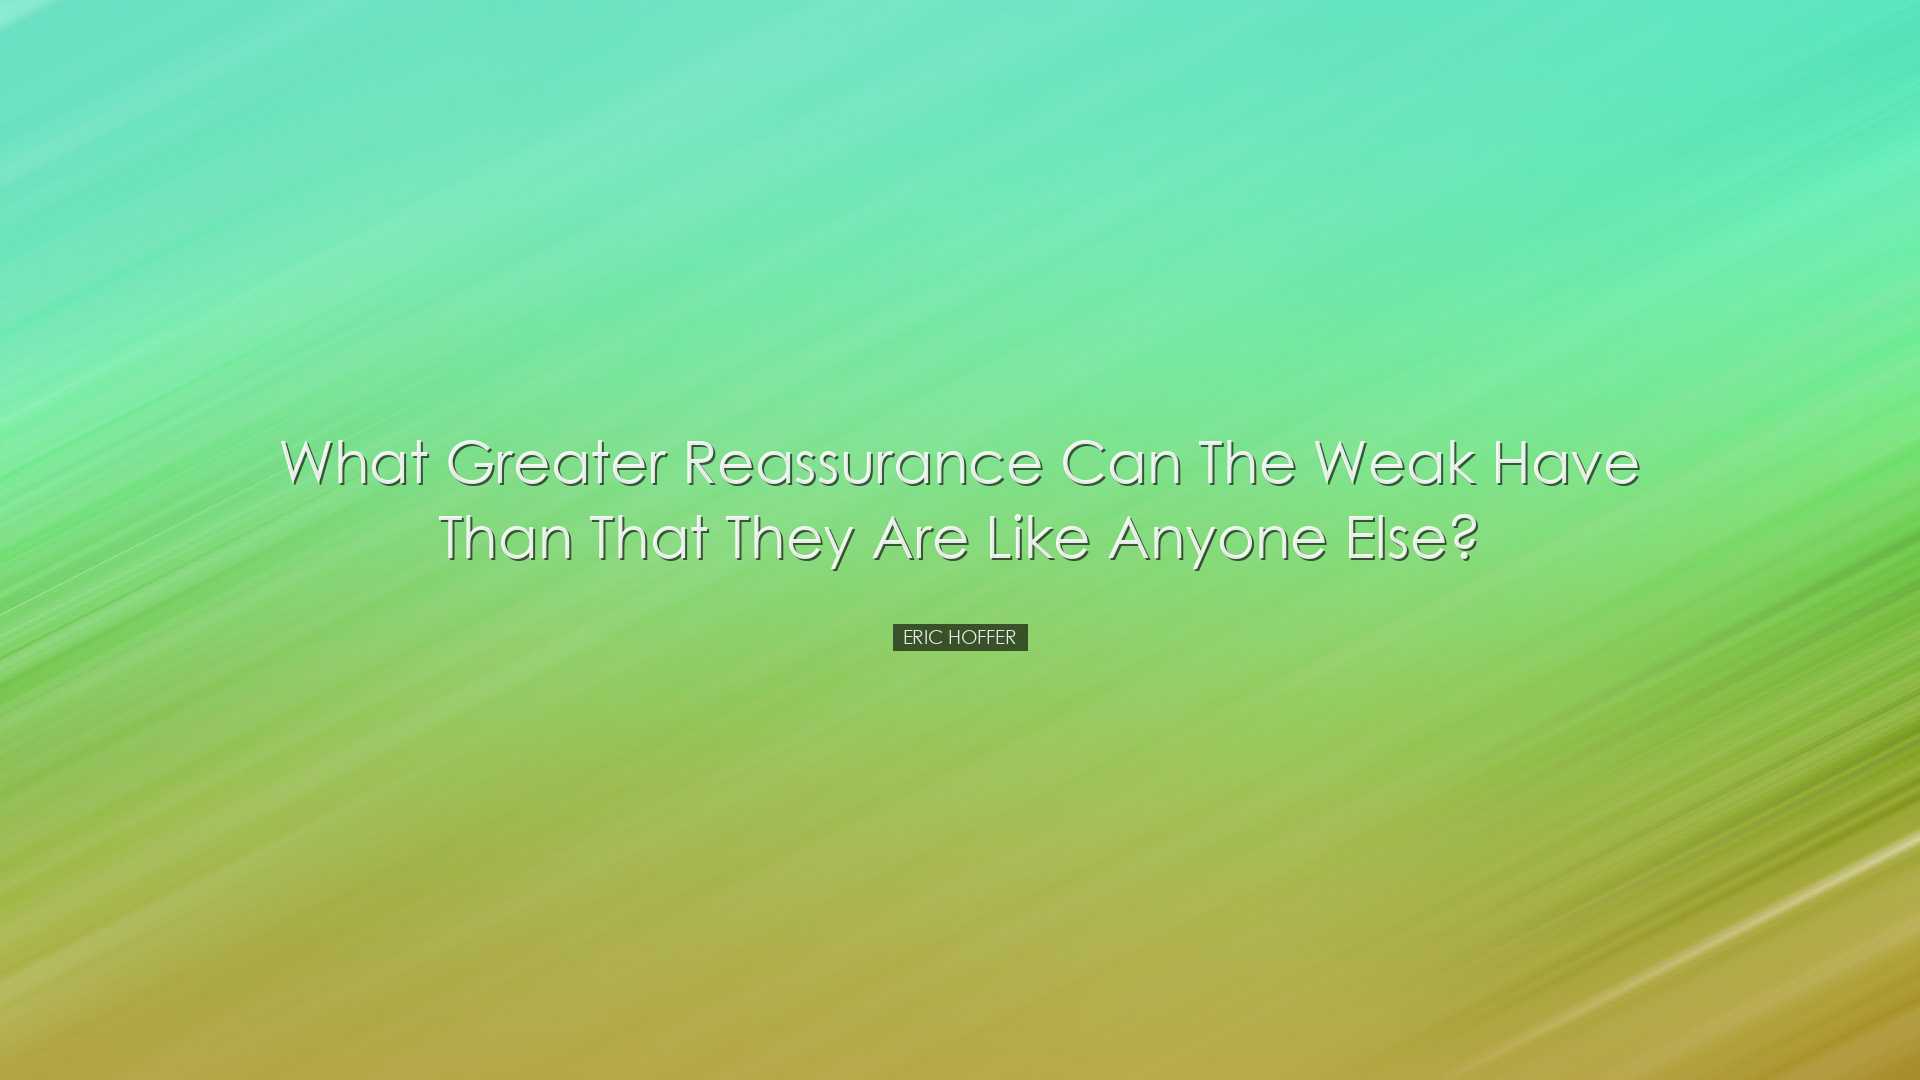 What greater reassurance can the weak have than that they are like